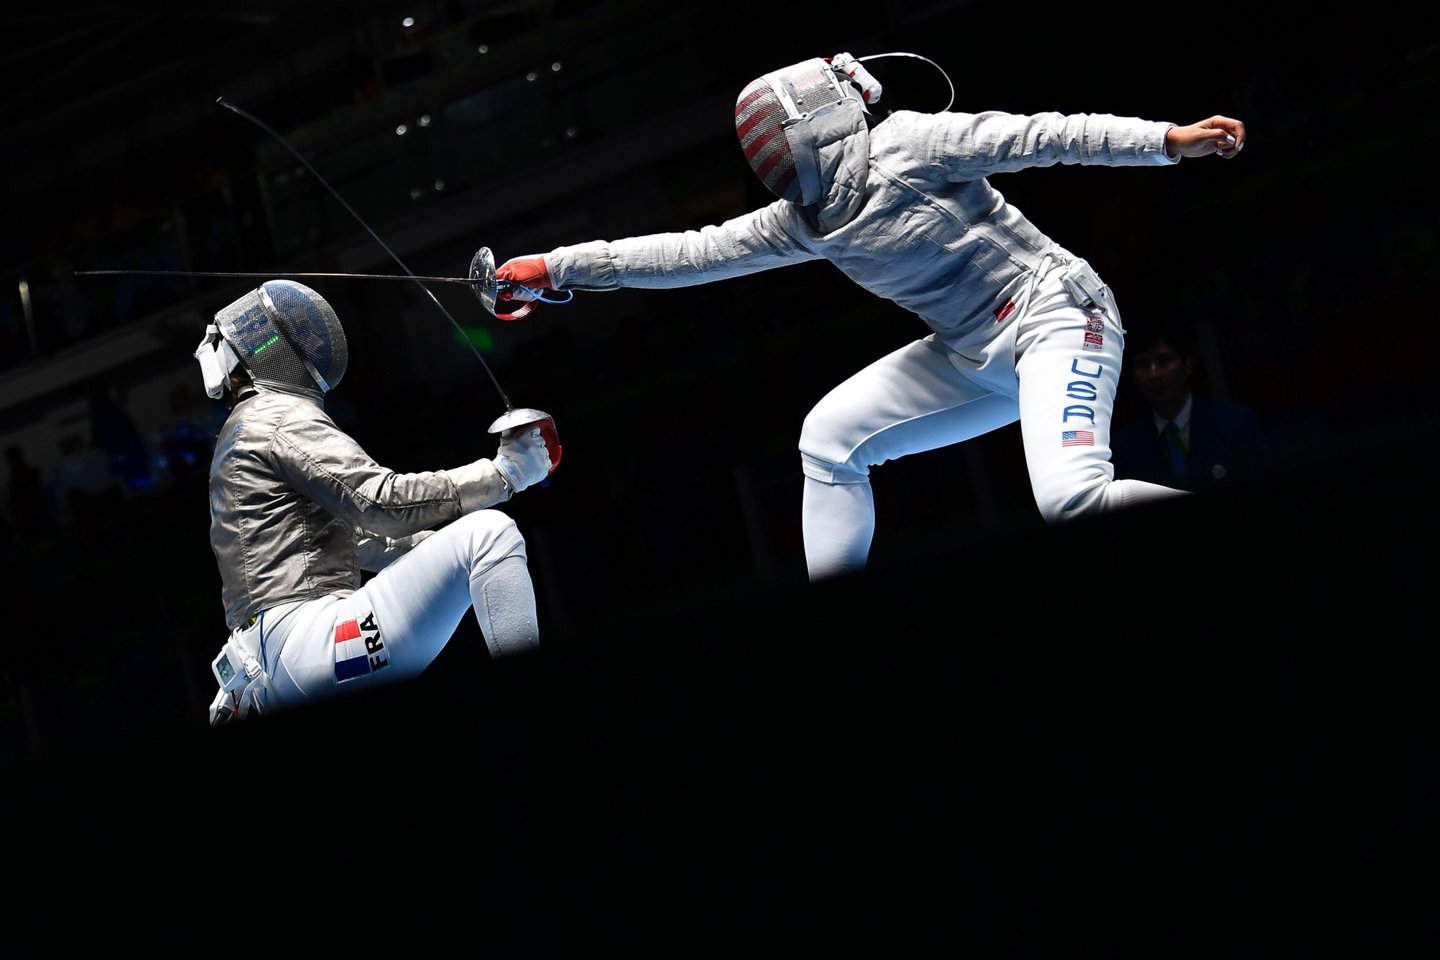 France's Cecilia Berder (L) competes against US Ibtihaj Muhammad during their womens individual sabre qualifying bout as part of the fencing event of the Rio 2016 Olympic Games, on August 8, 2016, at the Carioca Arena 3, in Rio de Janeiro. / AFP / Fabrice COFFRINI (Photo credit should read FABRICE COFFRINI/AFP/Getty Images)